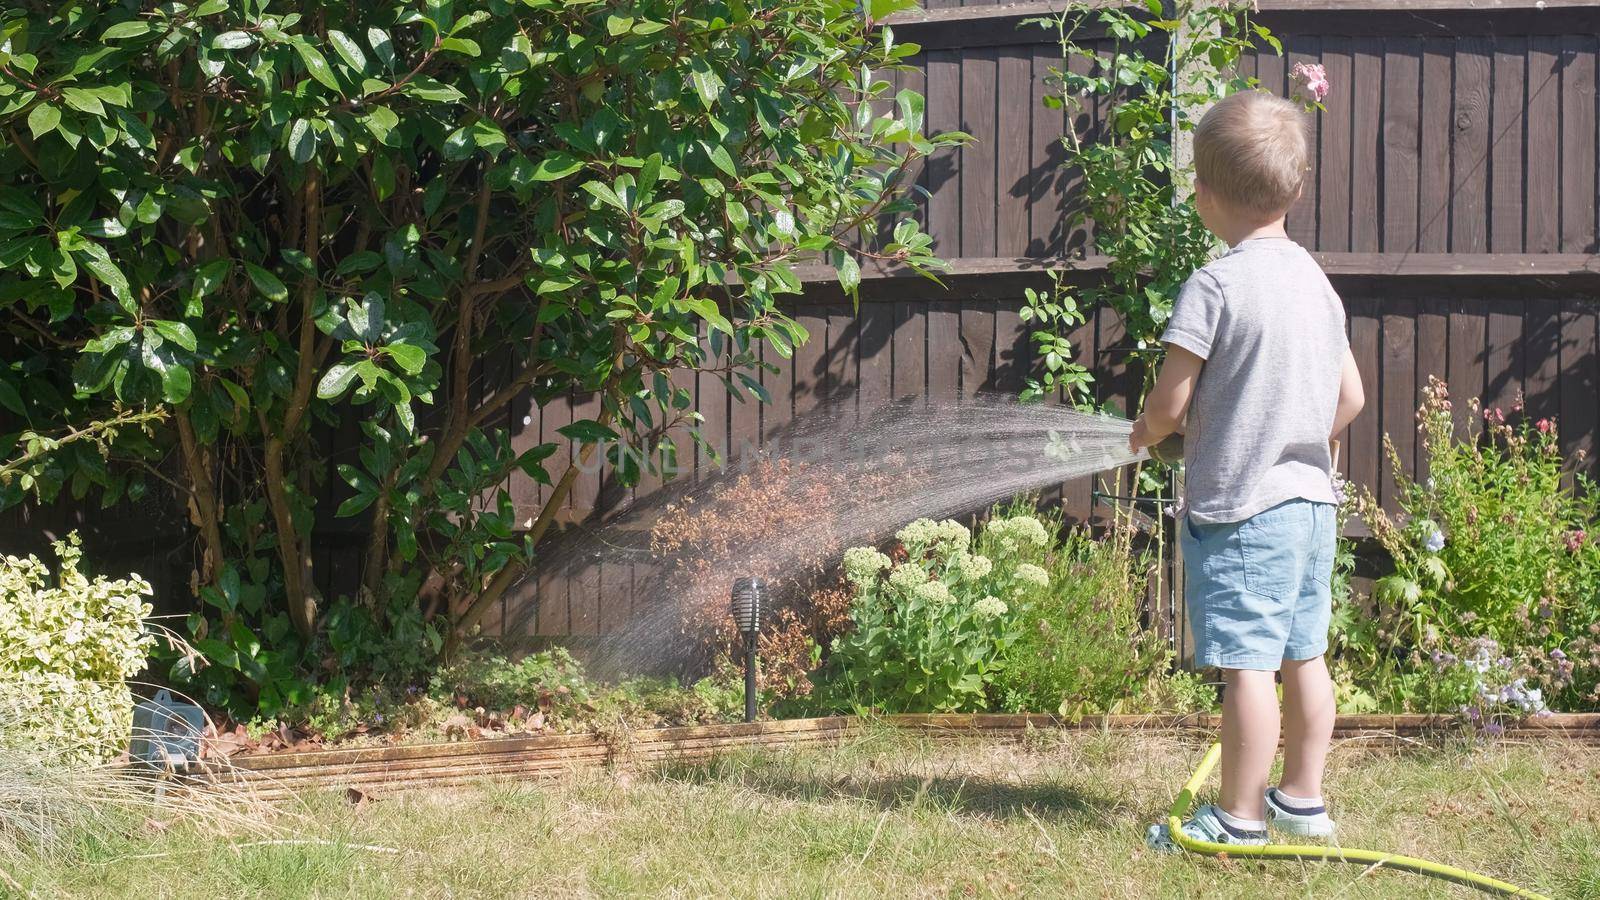 Funny little boy watering lawn plants in garden housing backyard. Adorable child playing with irrigation hose at hot sunny summer outdoors. Children help with housework. activity for kids. Childhood by mytrykau